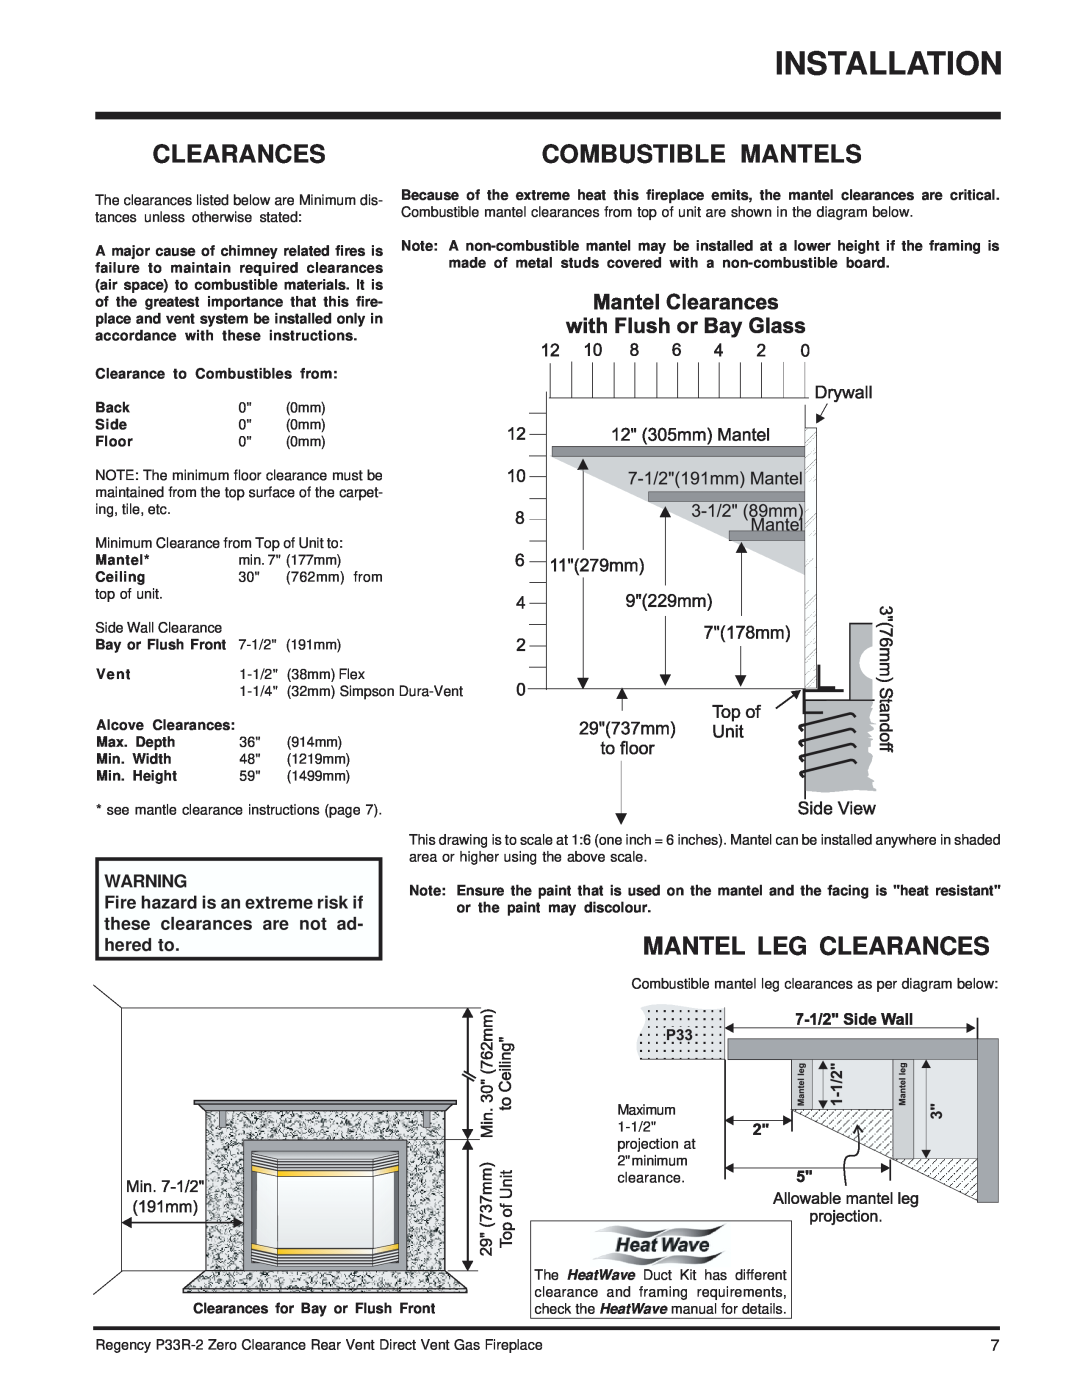 Regency P33R-NG2, P33R-LP2 Combustible Mantels, Mantel Leg Clearances, Fire hazard is an extreme risk if, hered to 